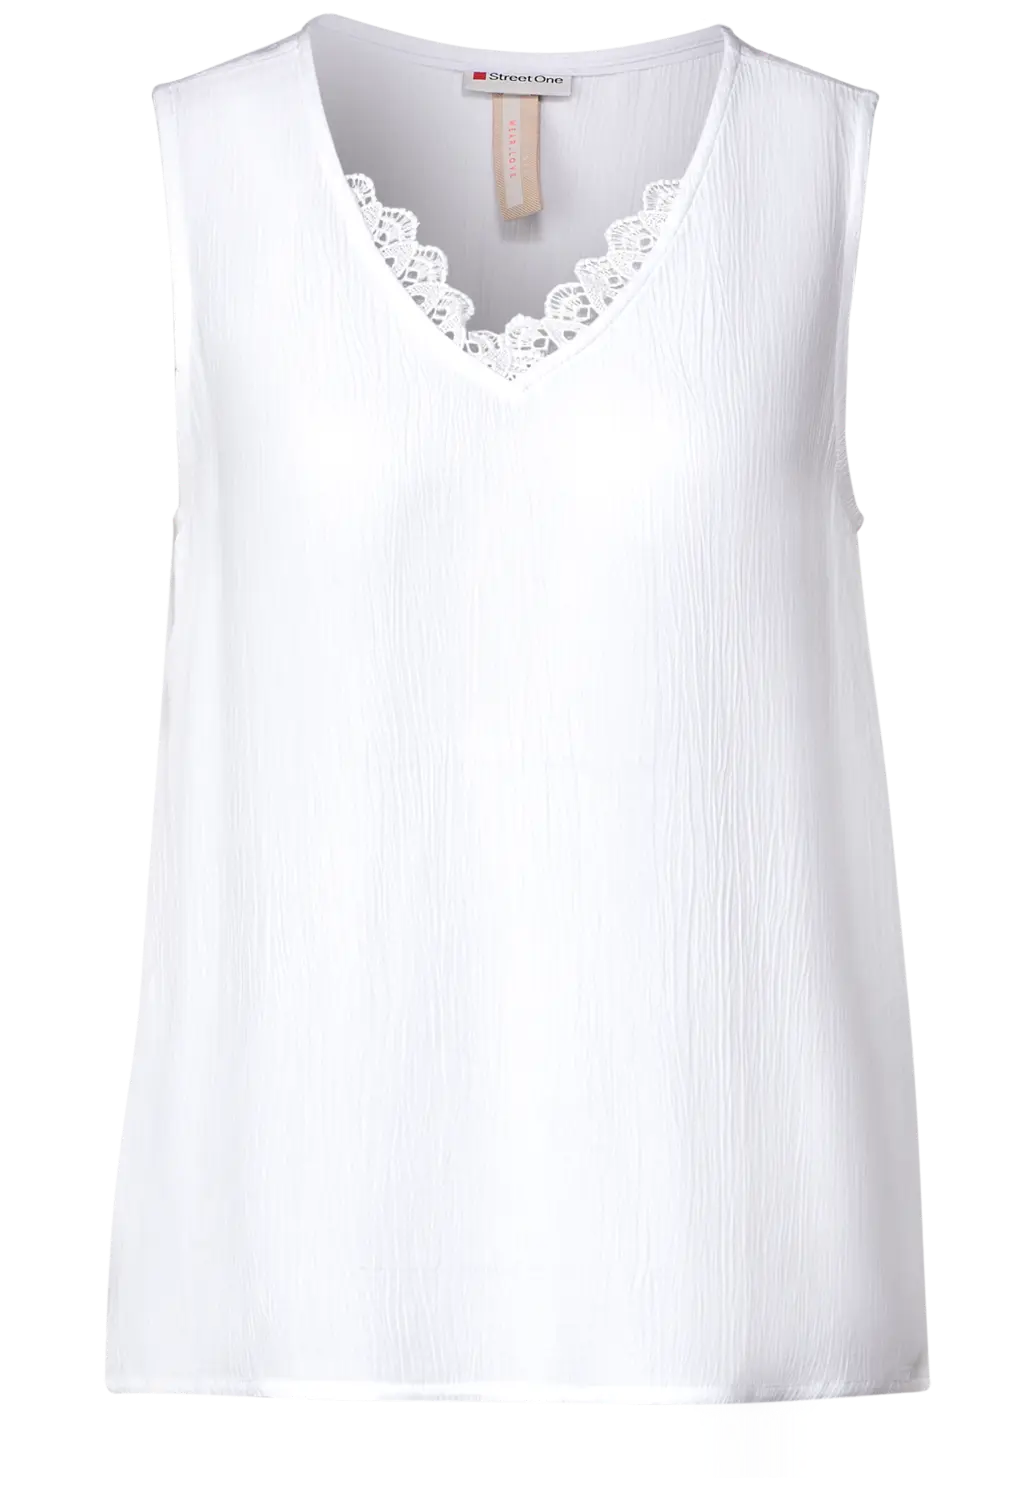 Street One White crinkle sleeveless top with crochet detail 343897